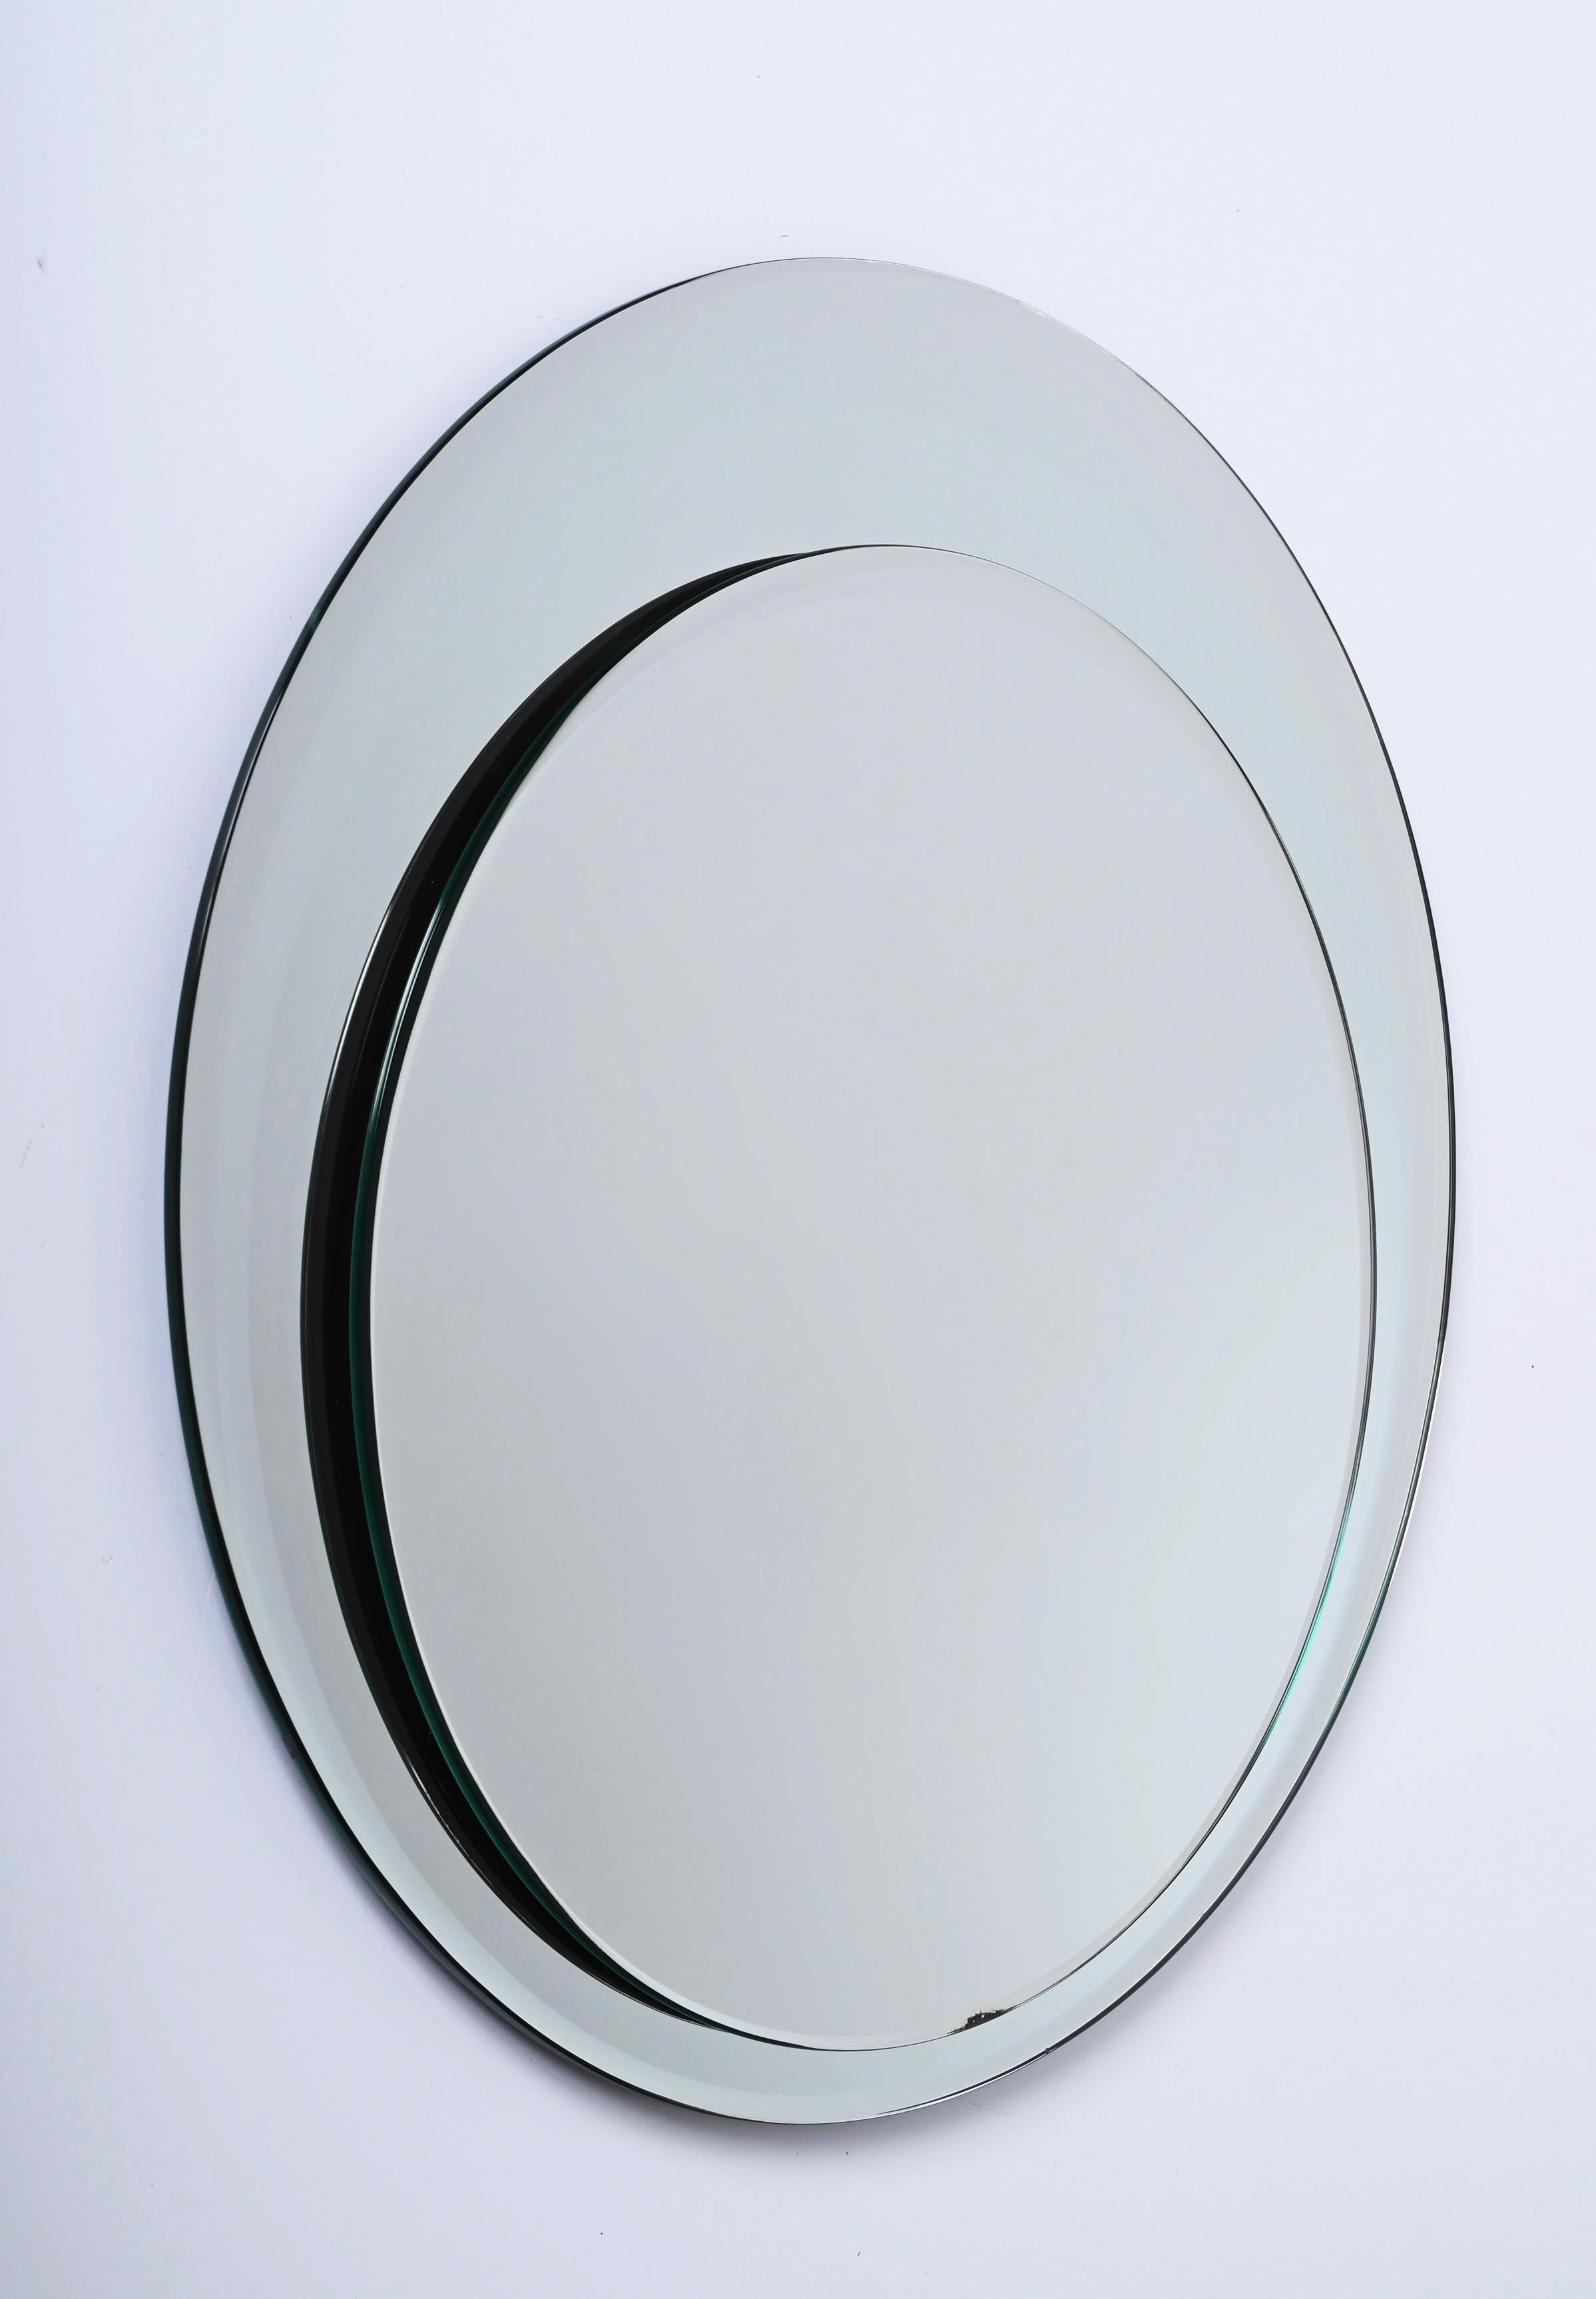 Midcentury Round Double Bevelled Mirror, Cristal Art, Italy, 1960s For Sale 1